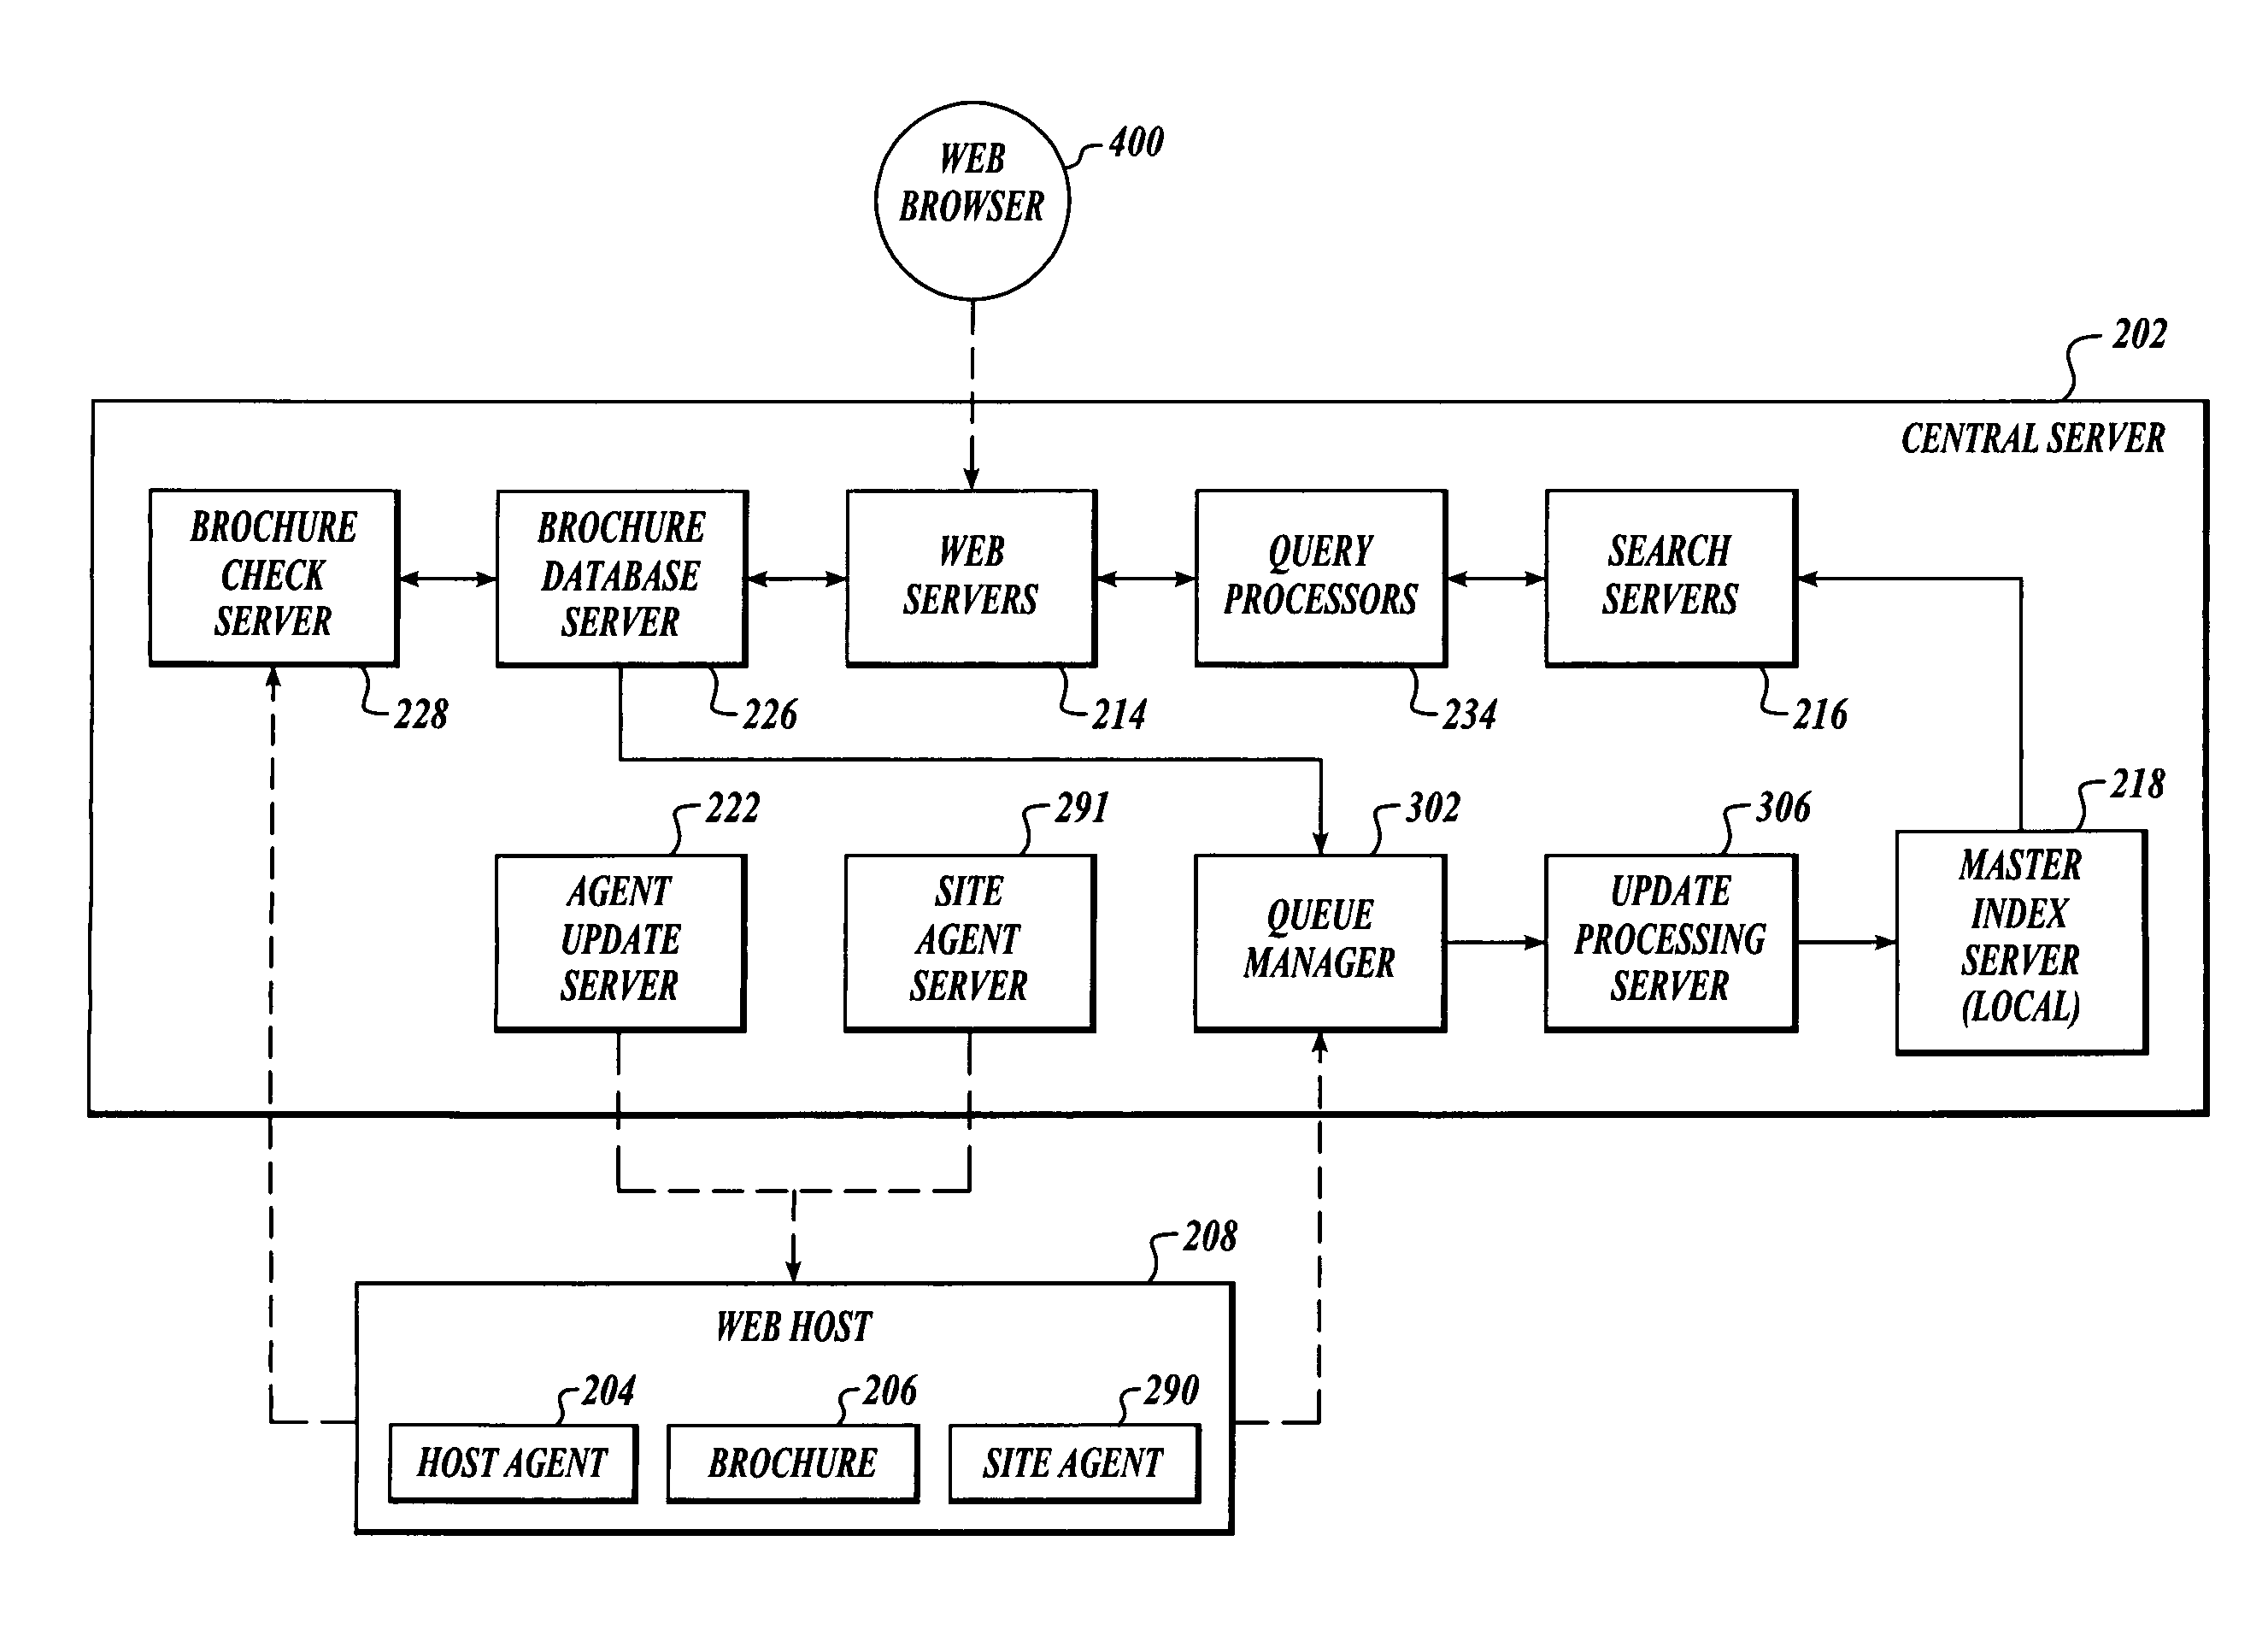 Method for using agents to create a computer index corresponding to the contents of networked computers